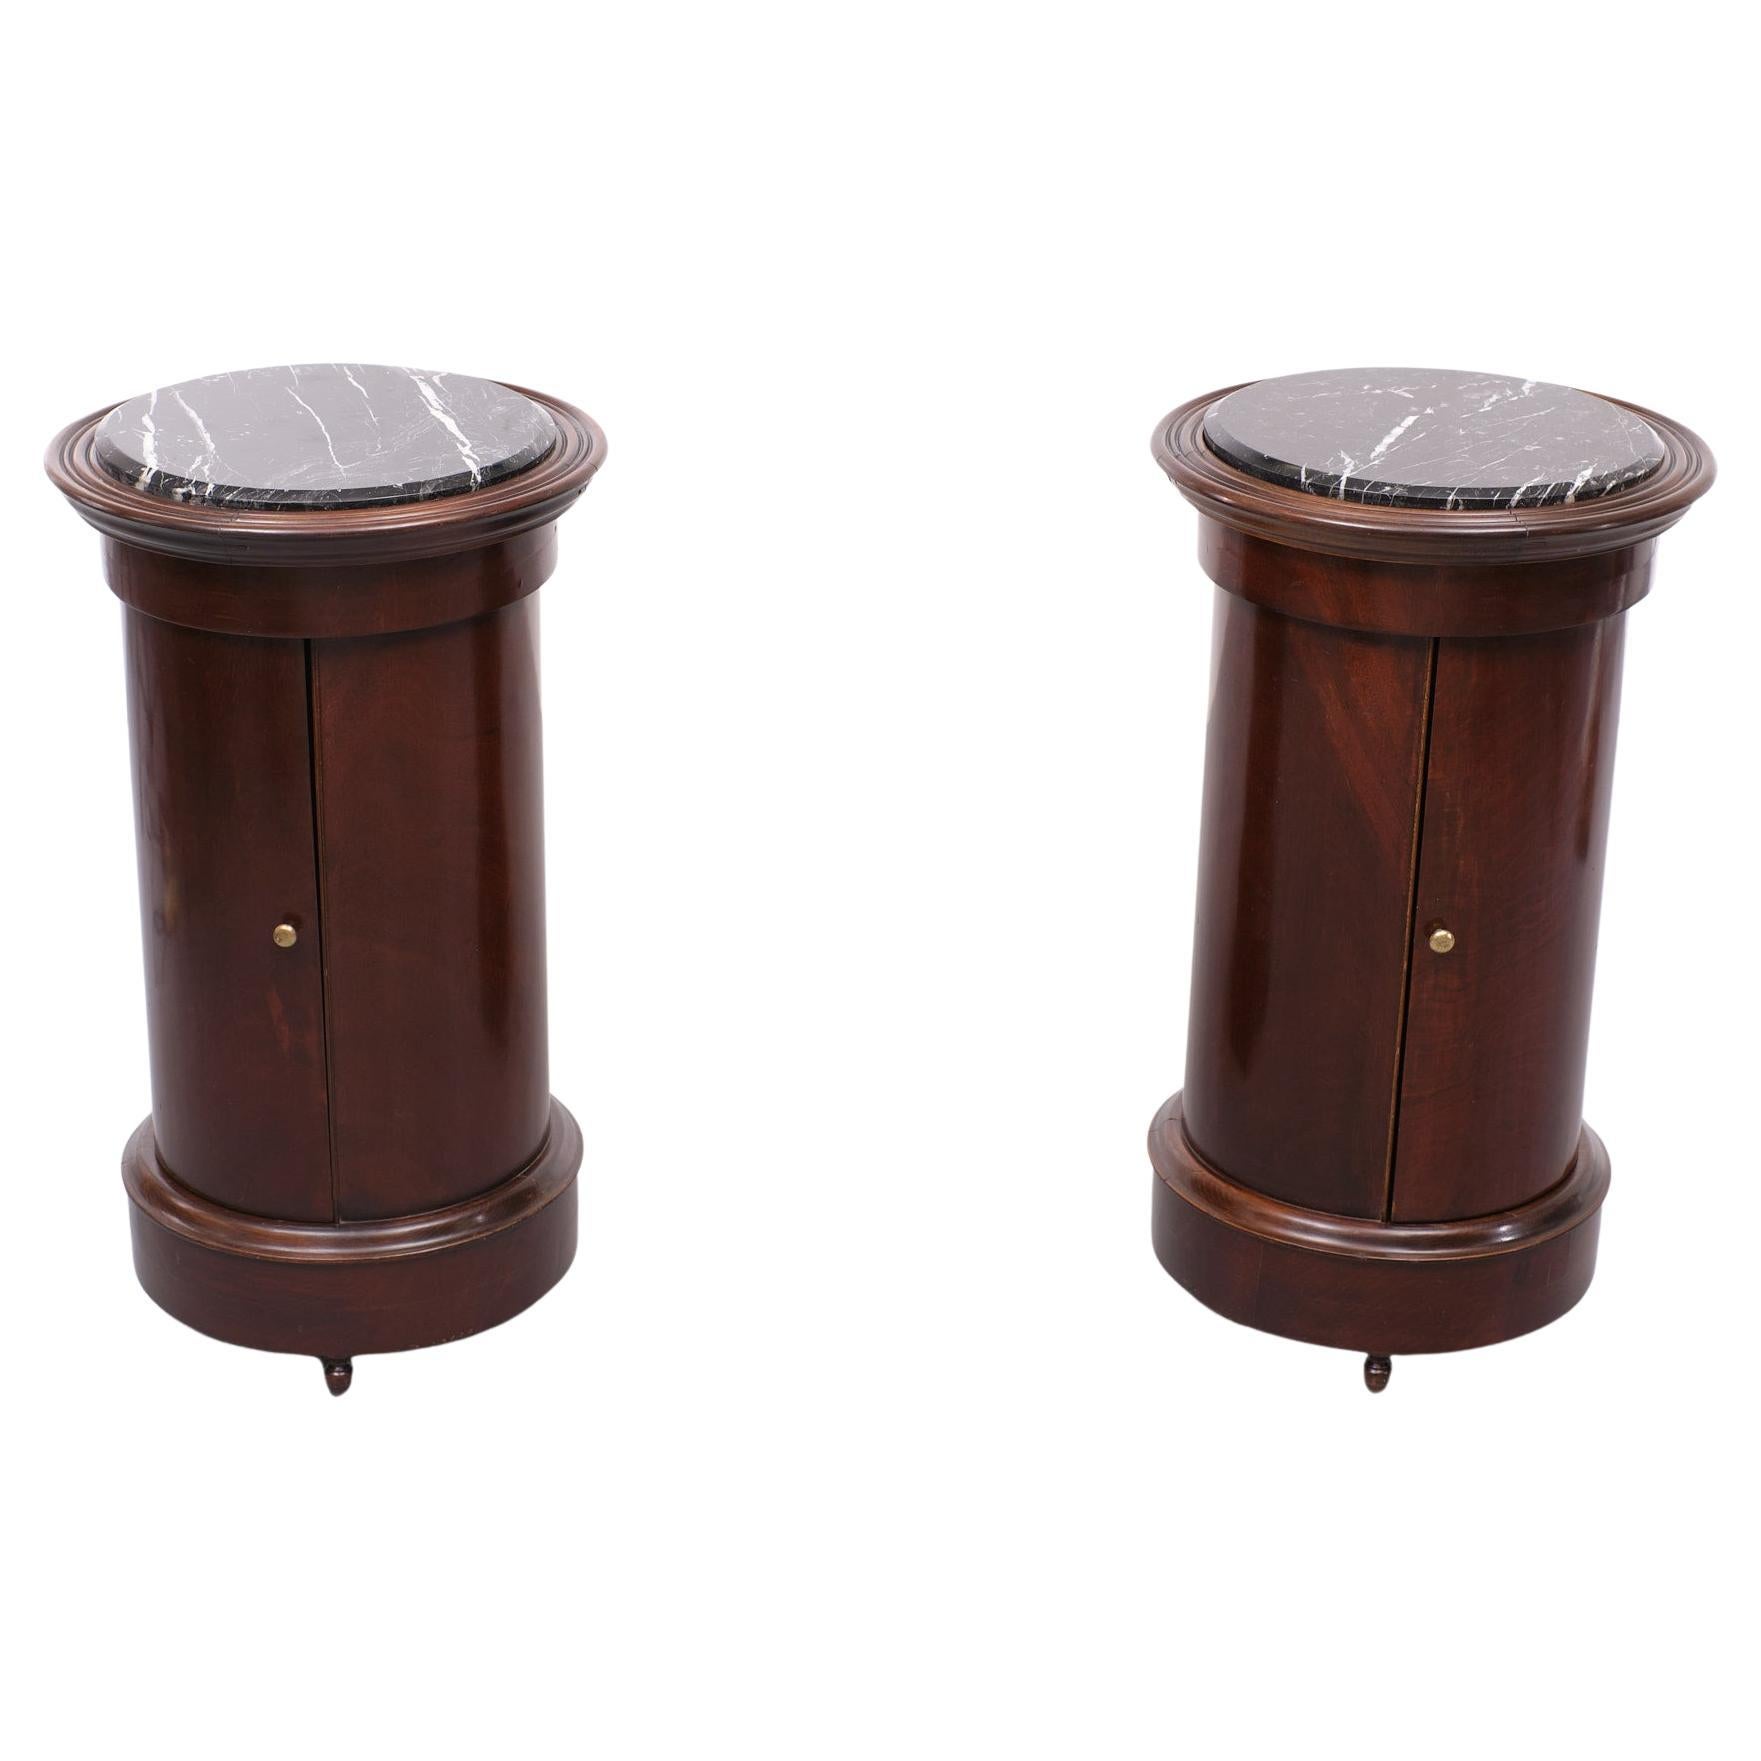 Set of Antique Cylindrical Nightstands 1880s England  For Sale